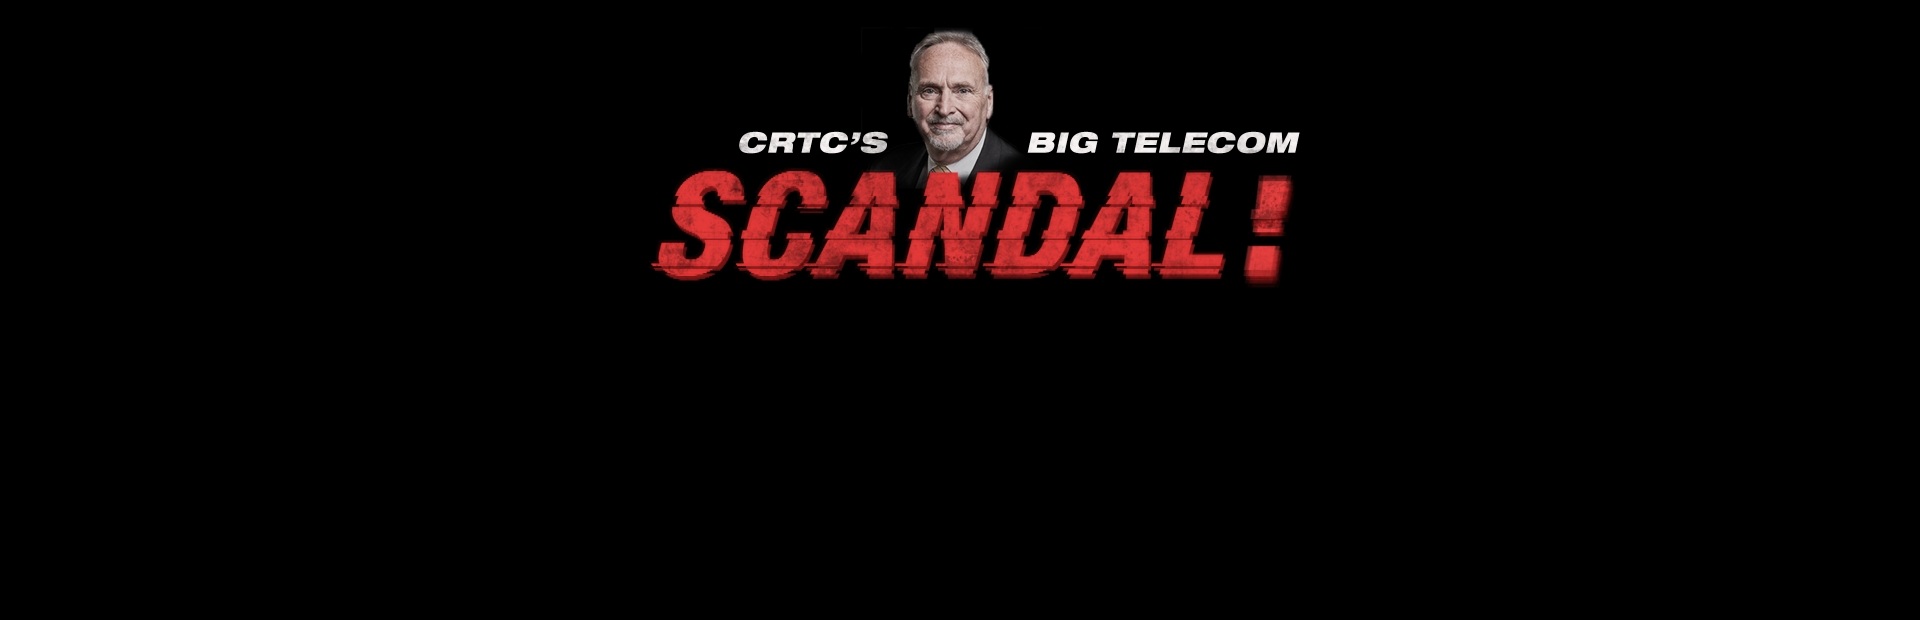 The CRTC just screwed Canadians, and only the government can fix it.